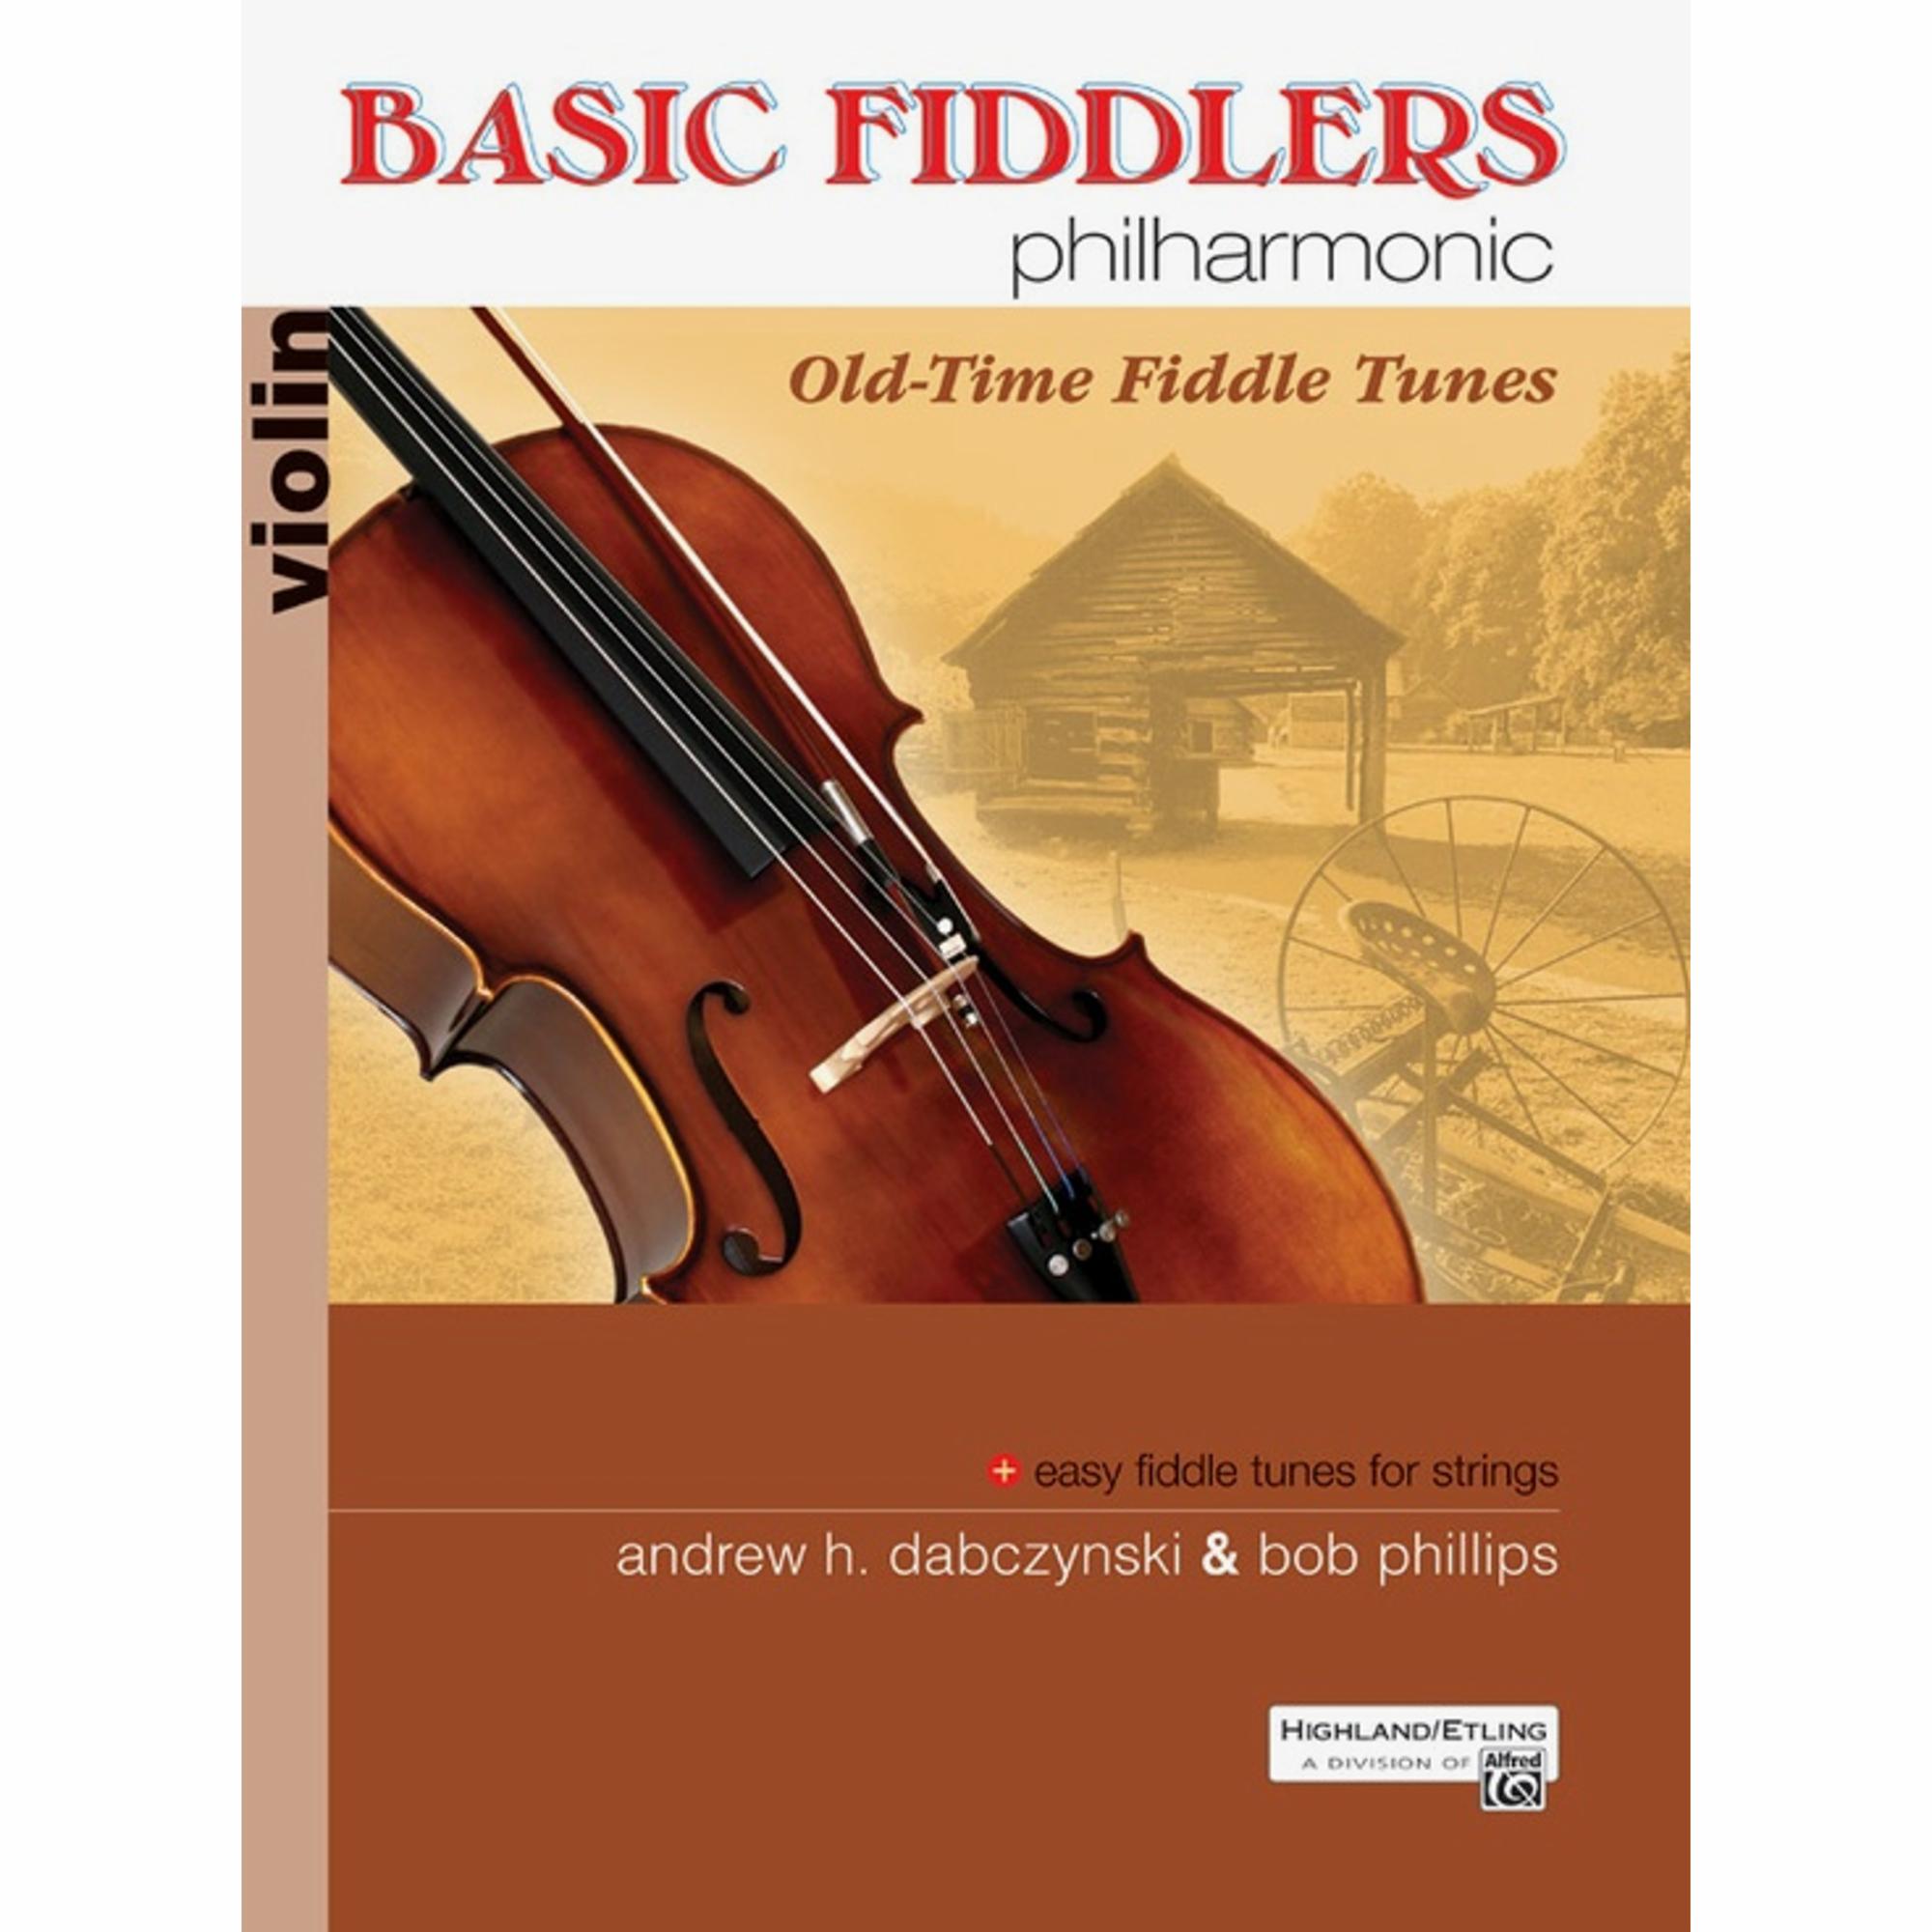 Basic Fiddlers Philharmonic: Old-Time Fiddle Tunes for Strings